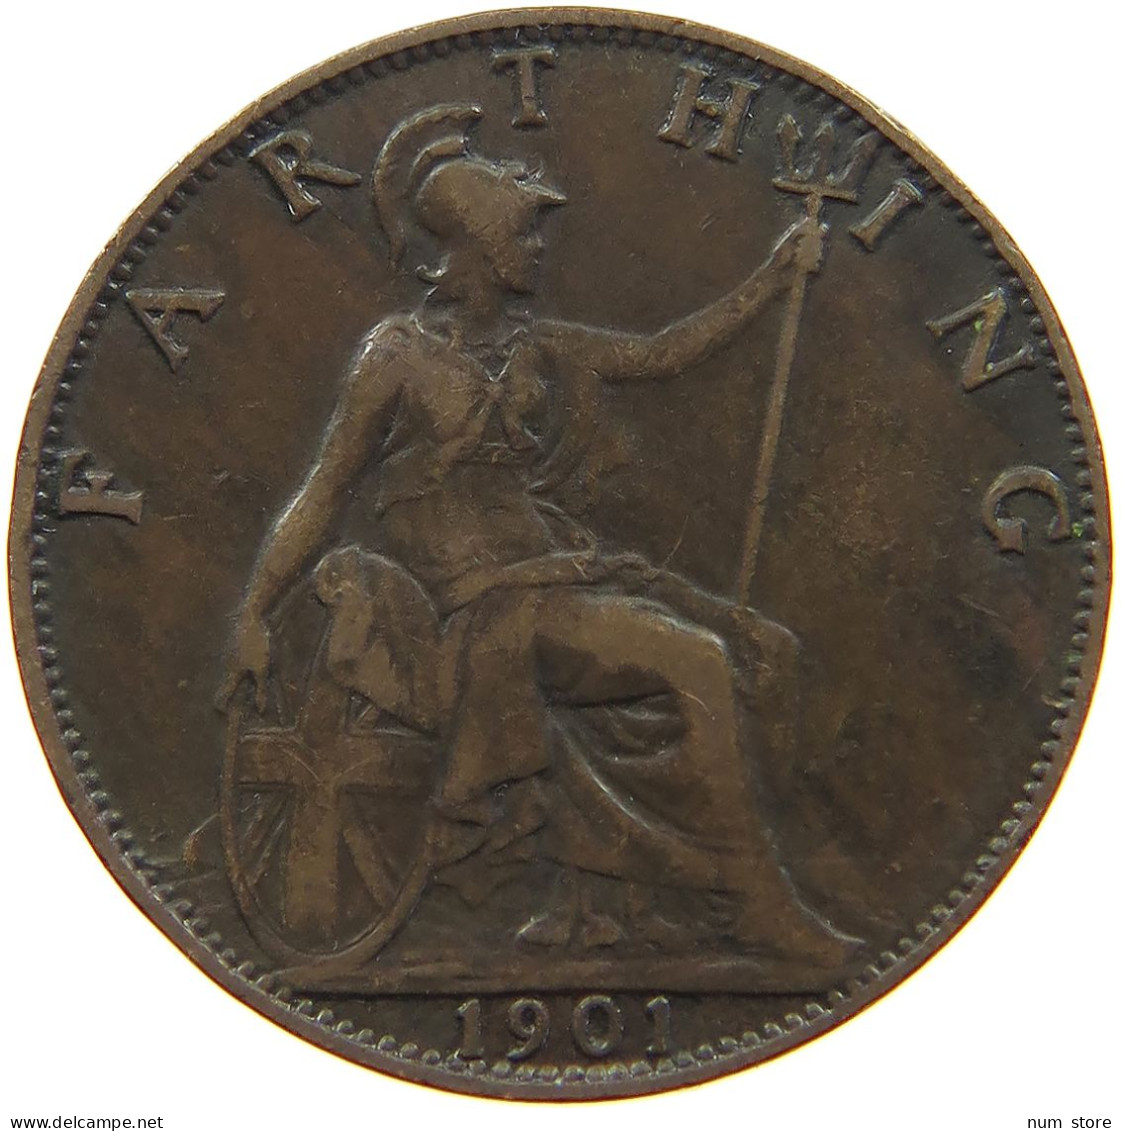 GREAT BRITAIN FARTHING 1901 Victoria 1837-1901 #a011 0901 - B. 1 Farthing